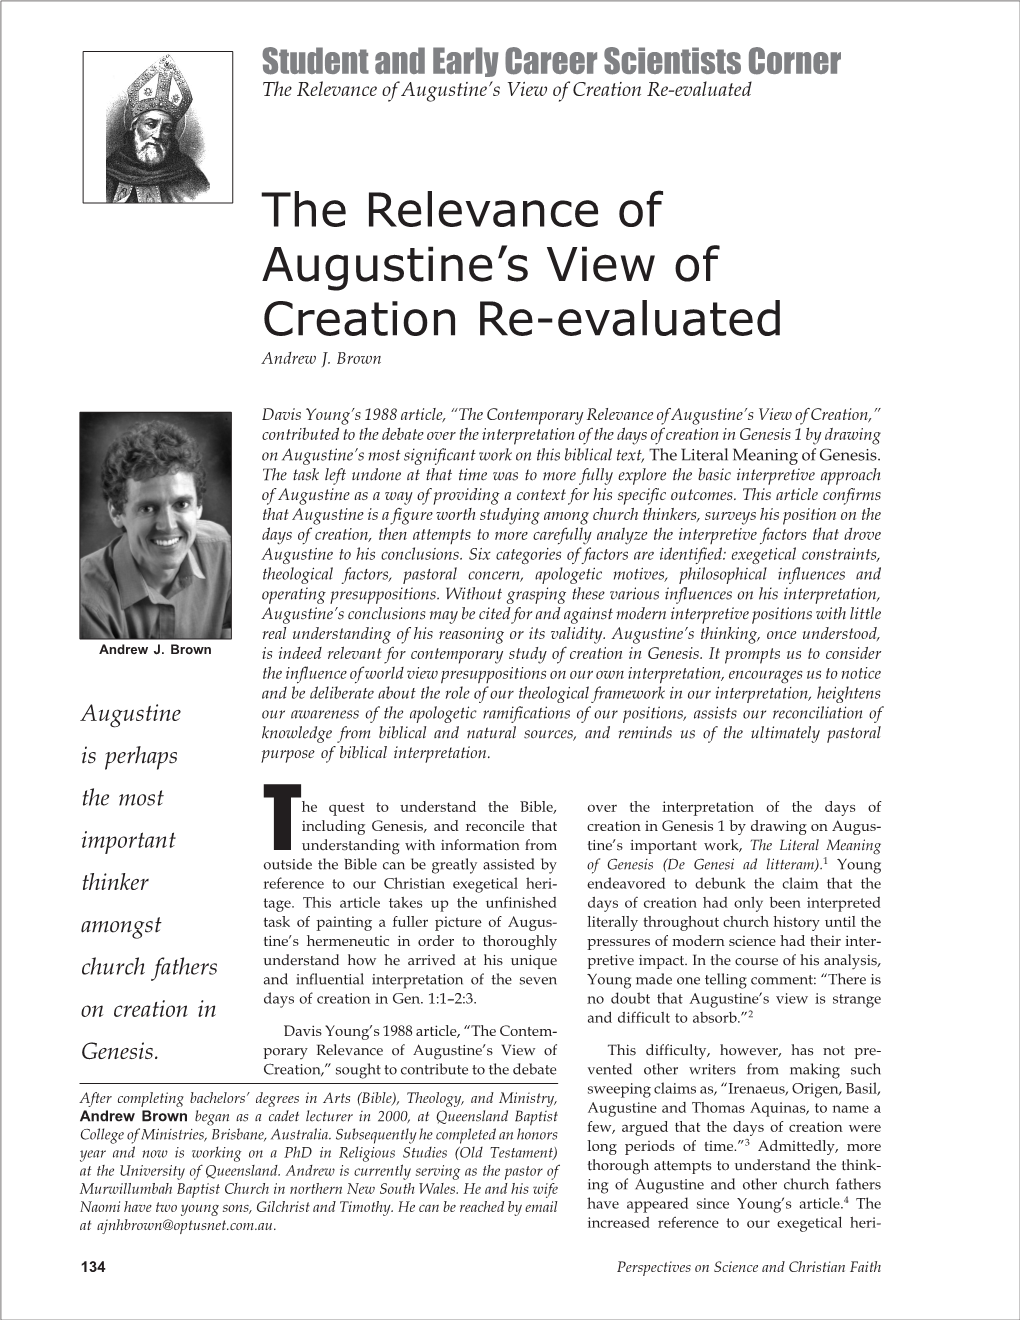 The Relevance of Augustine's View of Creation Re-Evaluated